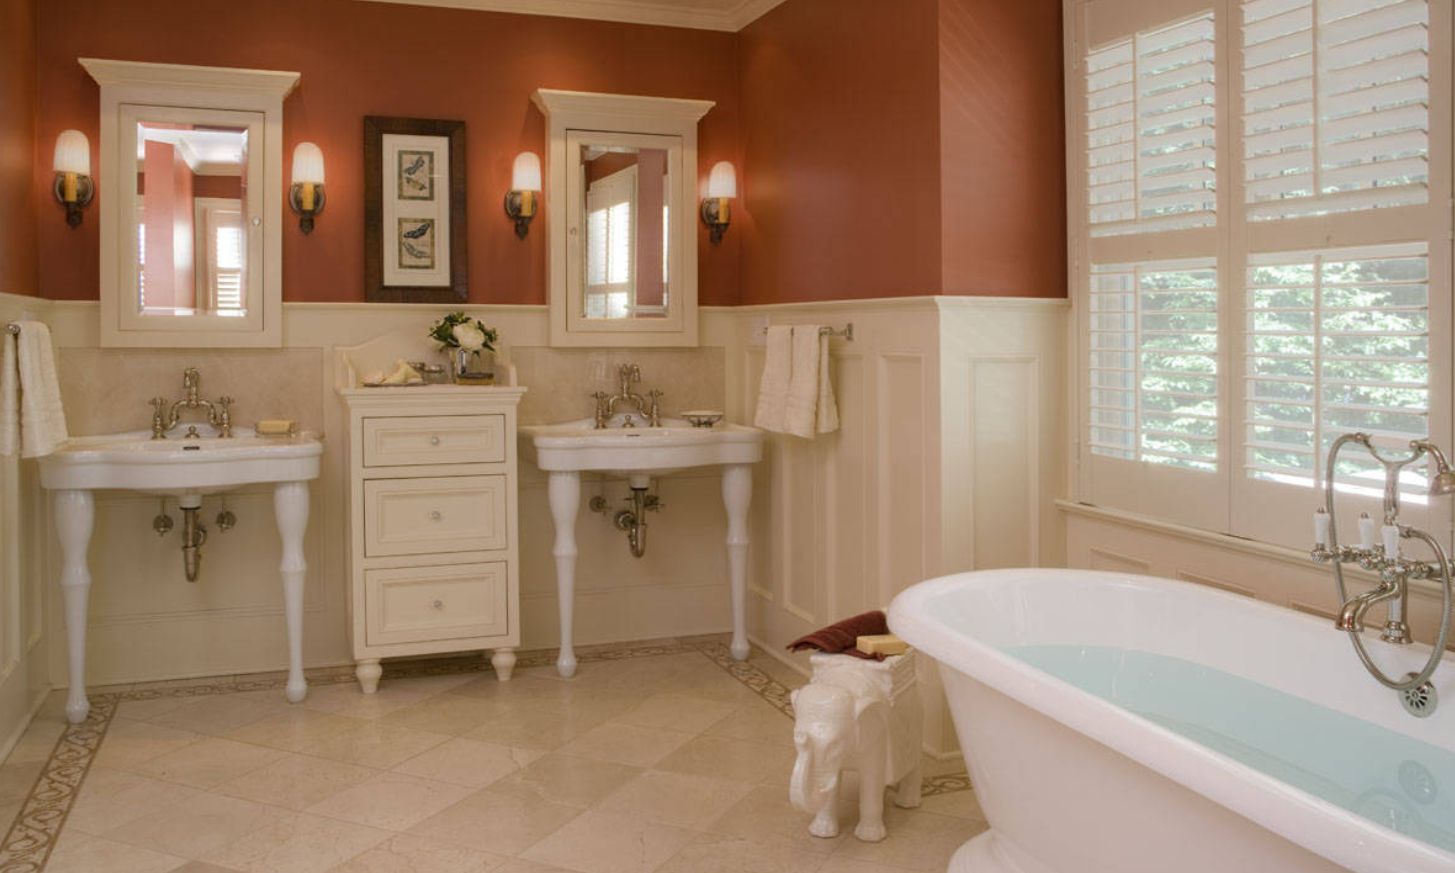 Red bathroom paint walls with wainscoting bathroom wall